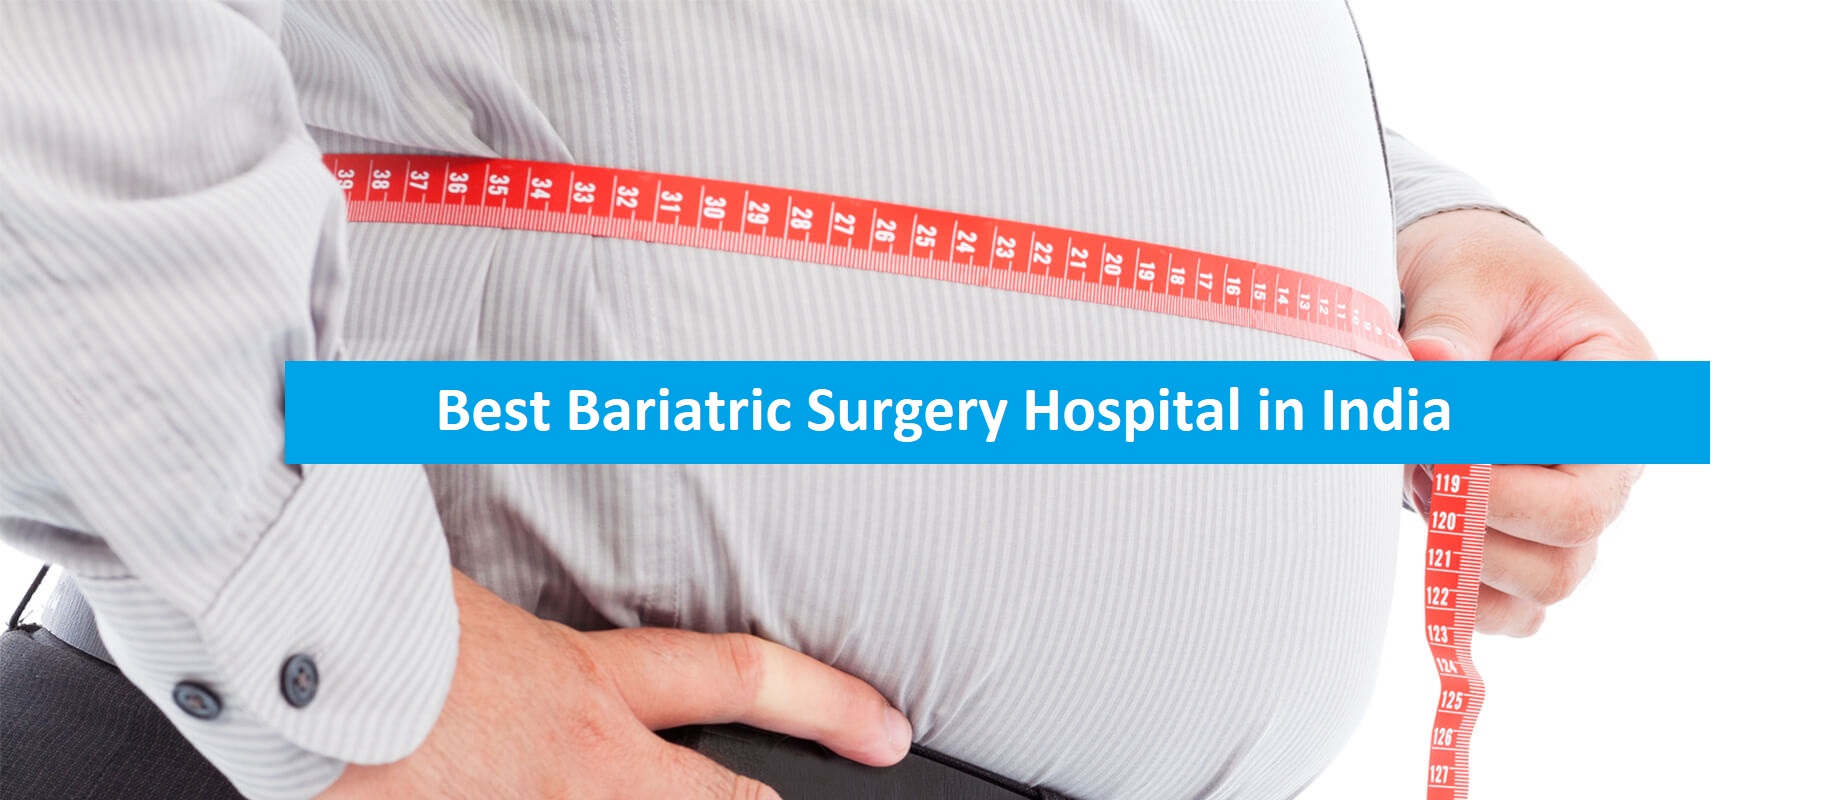 Best Bariatric Surgery Hospital in India 